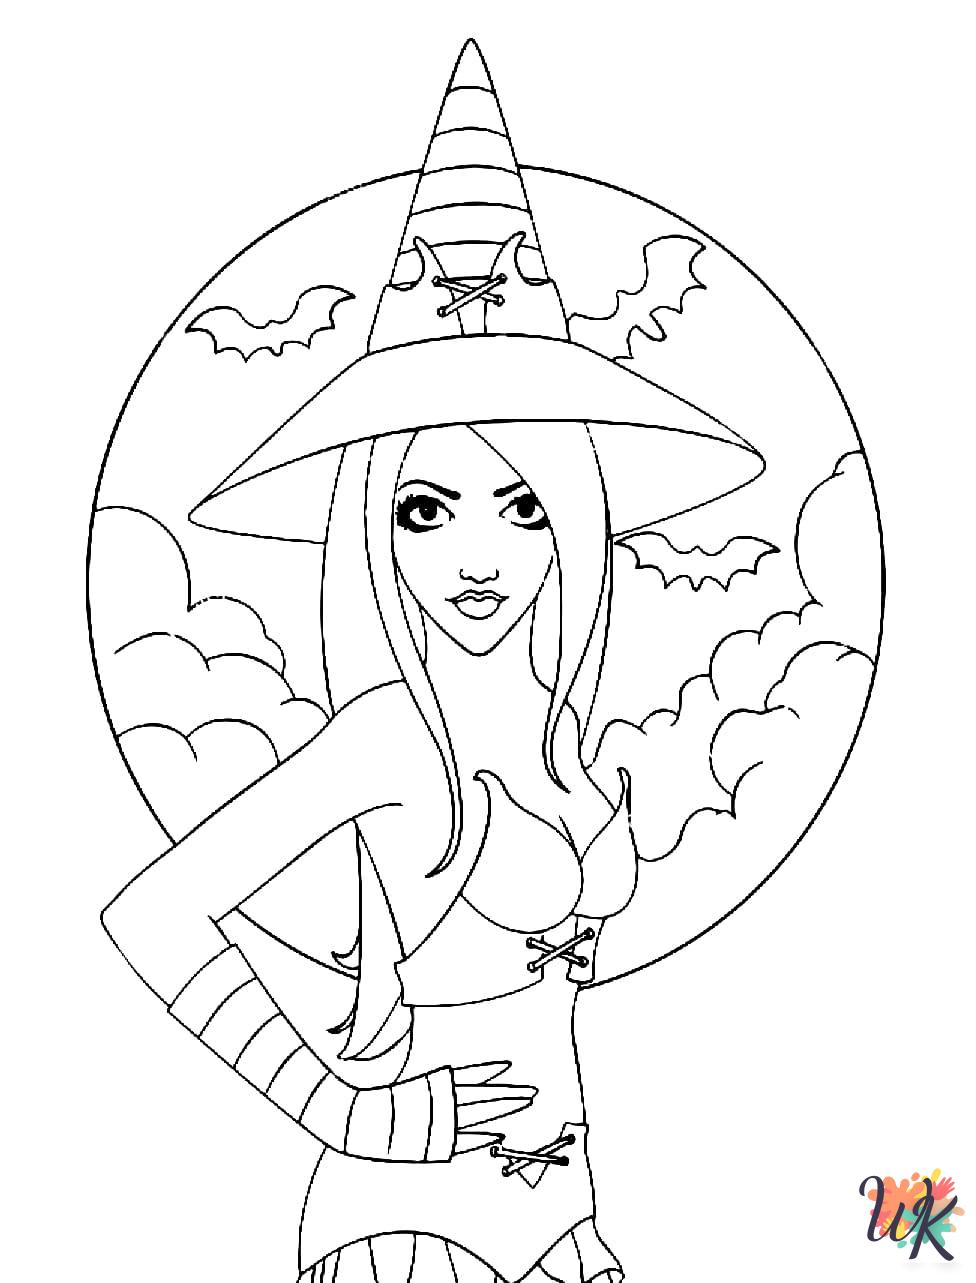 Witch decorations coloring pages